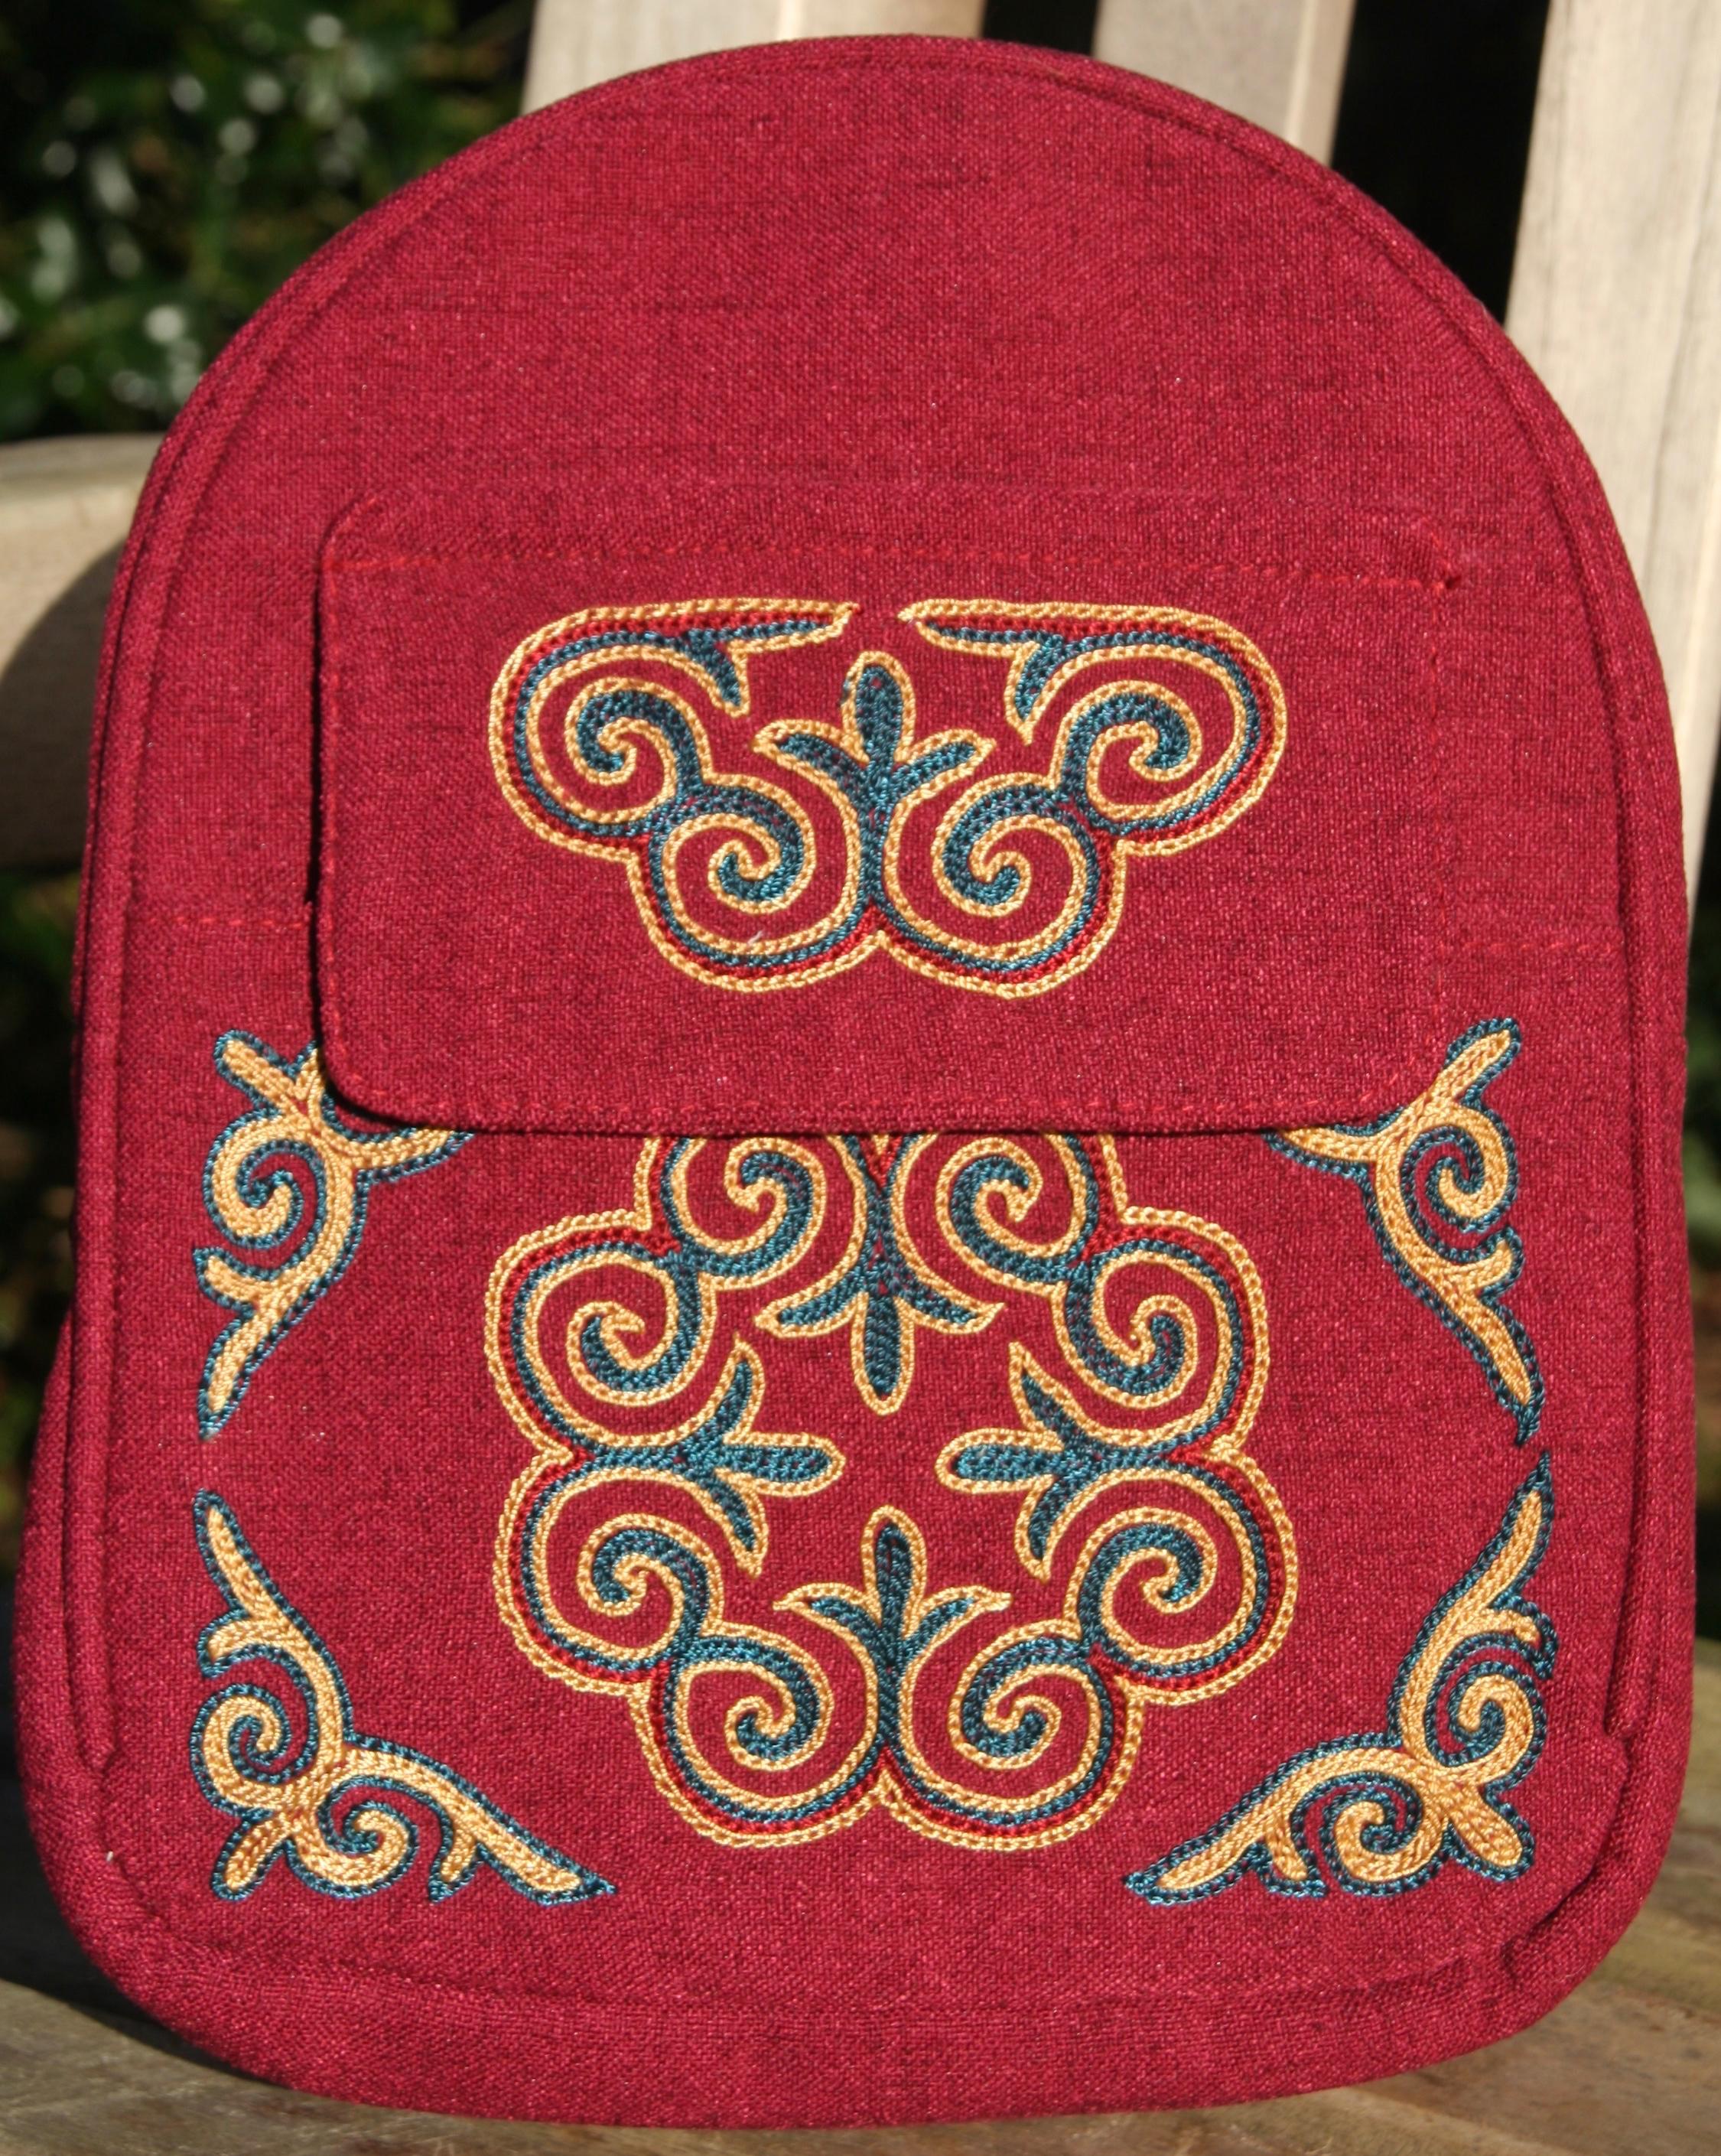 Fair-trade Handmade Mongolian mini backpack Red material Brown and Cream embroidery using traditional Kazakh motifs from East West Creative